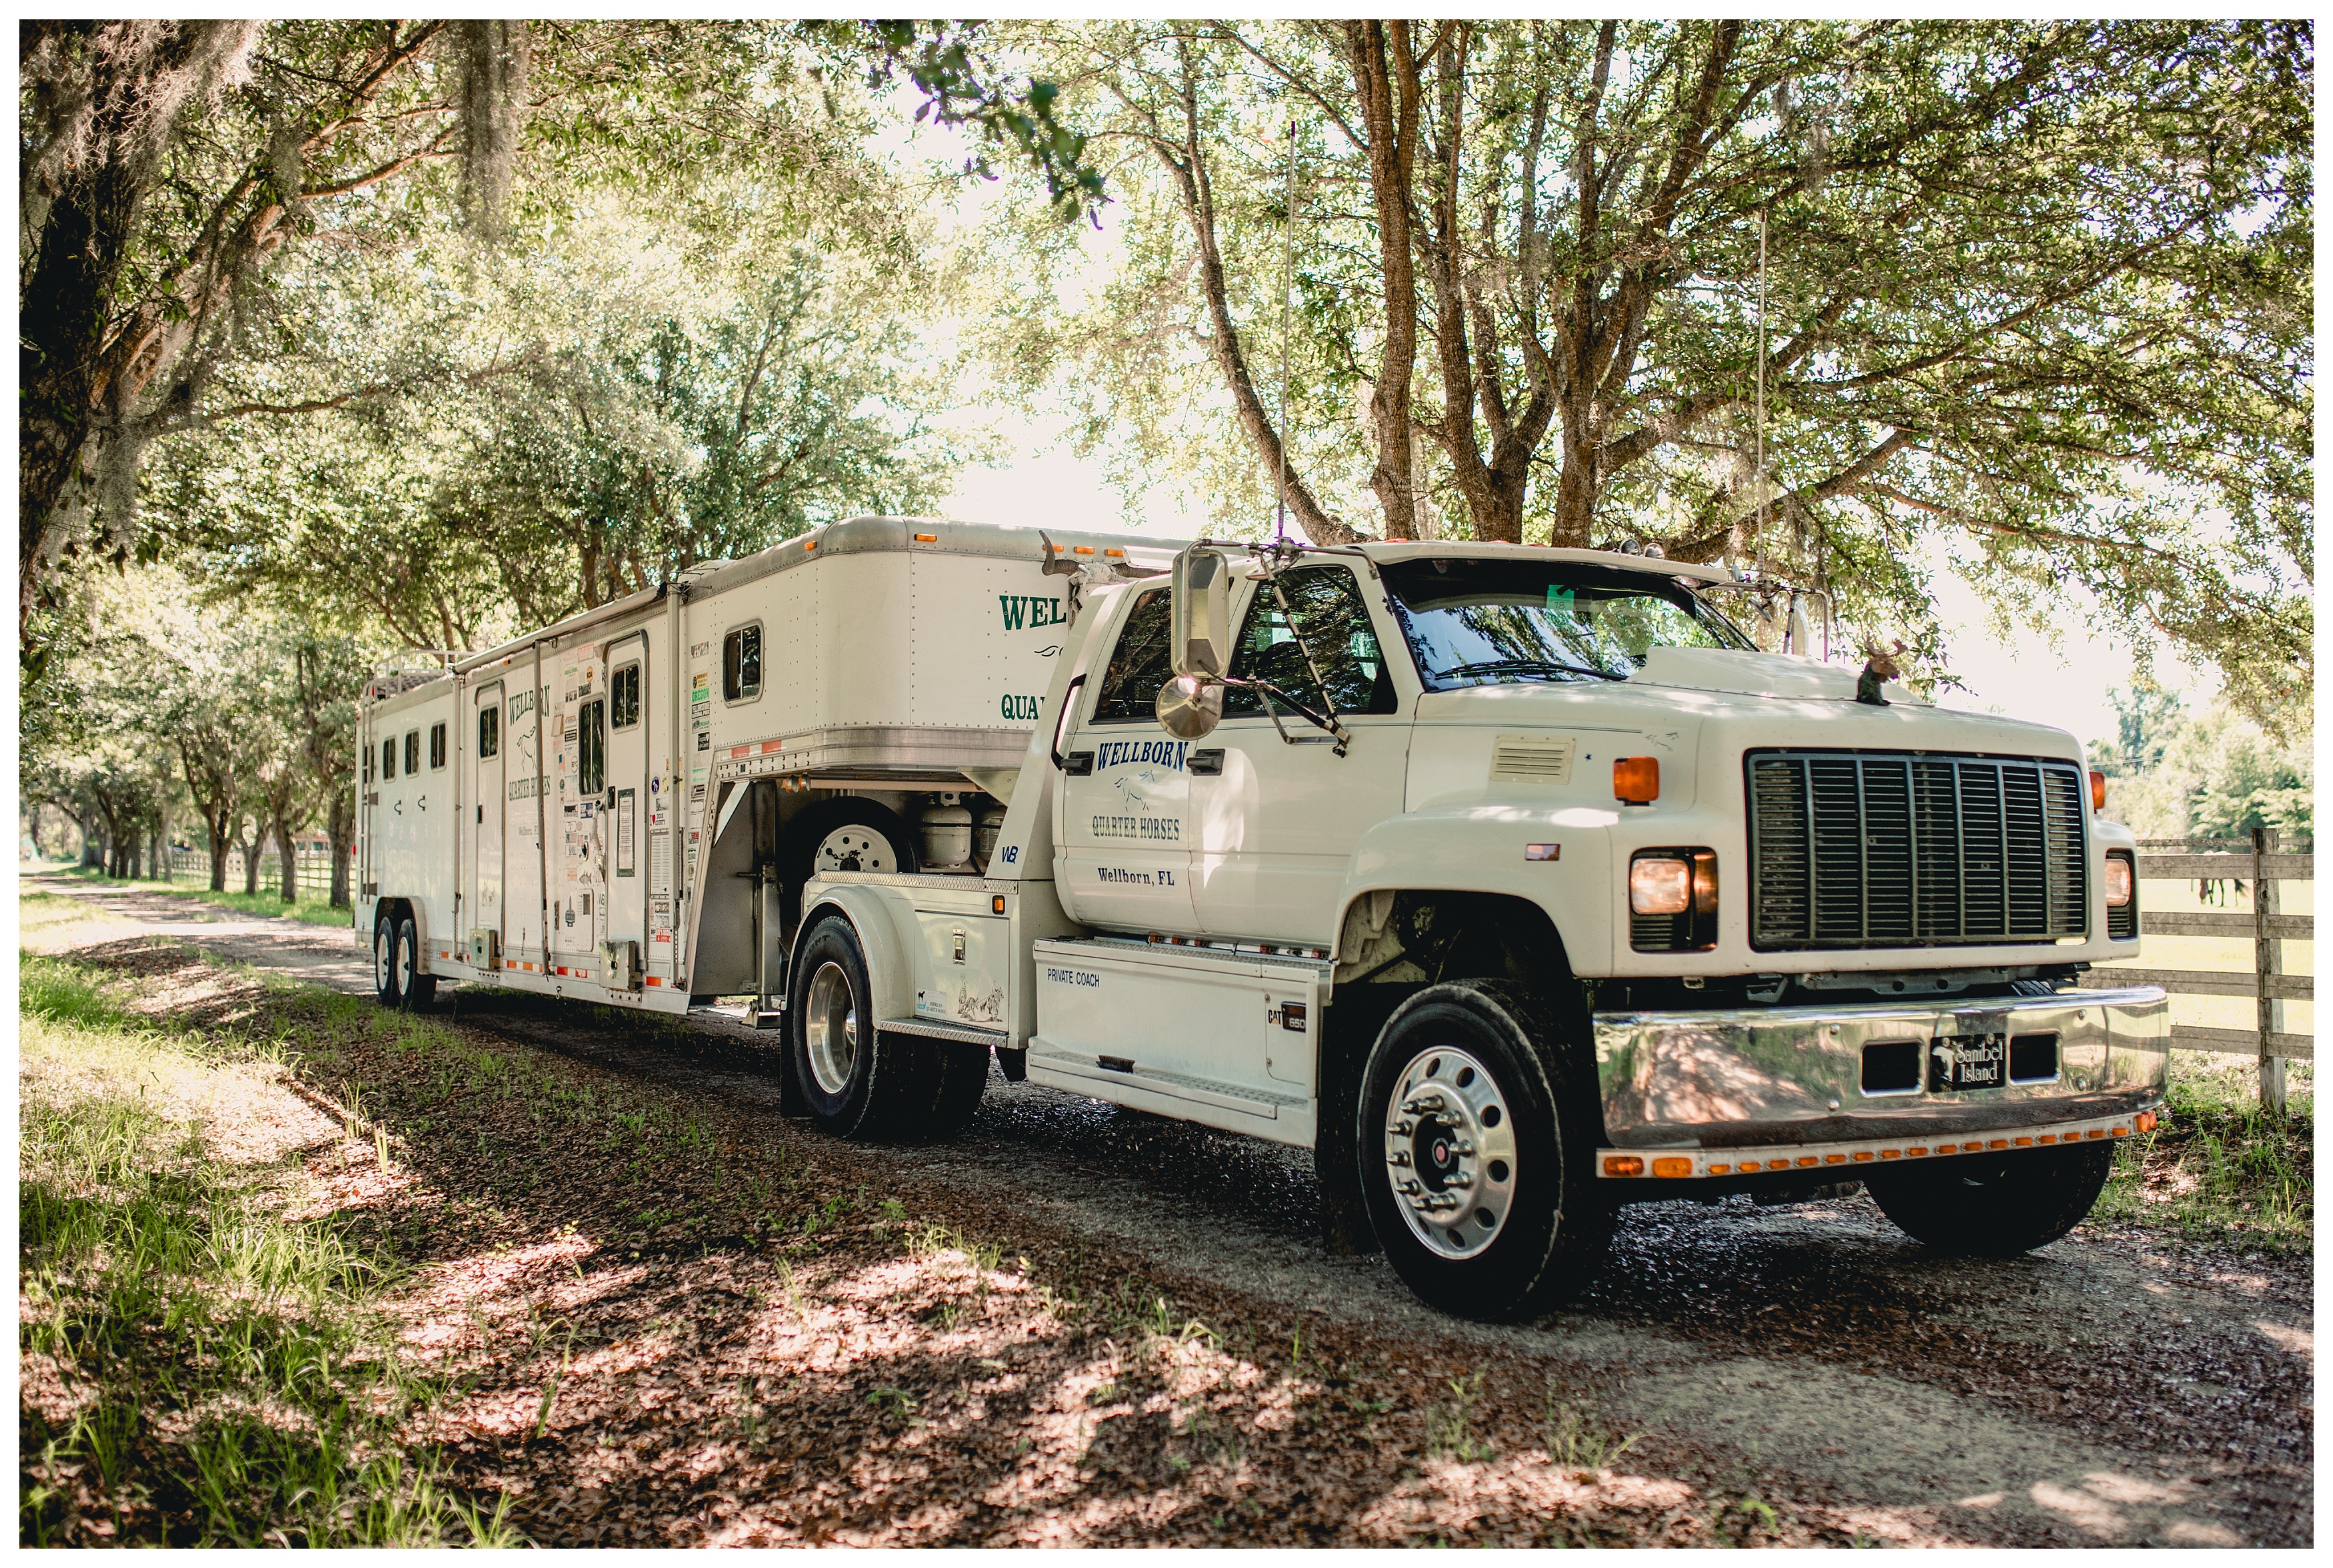 Wellborn Quarter Horses transportation company and horse training in Florida. Shelly Williams Photography